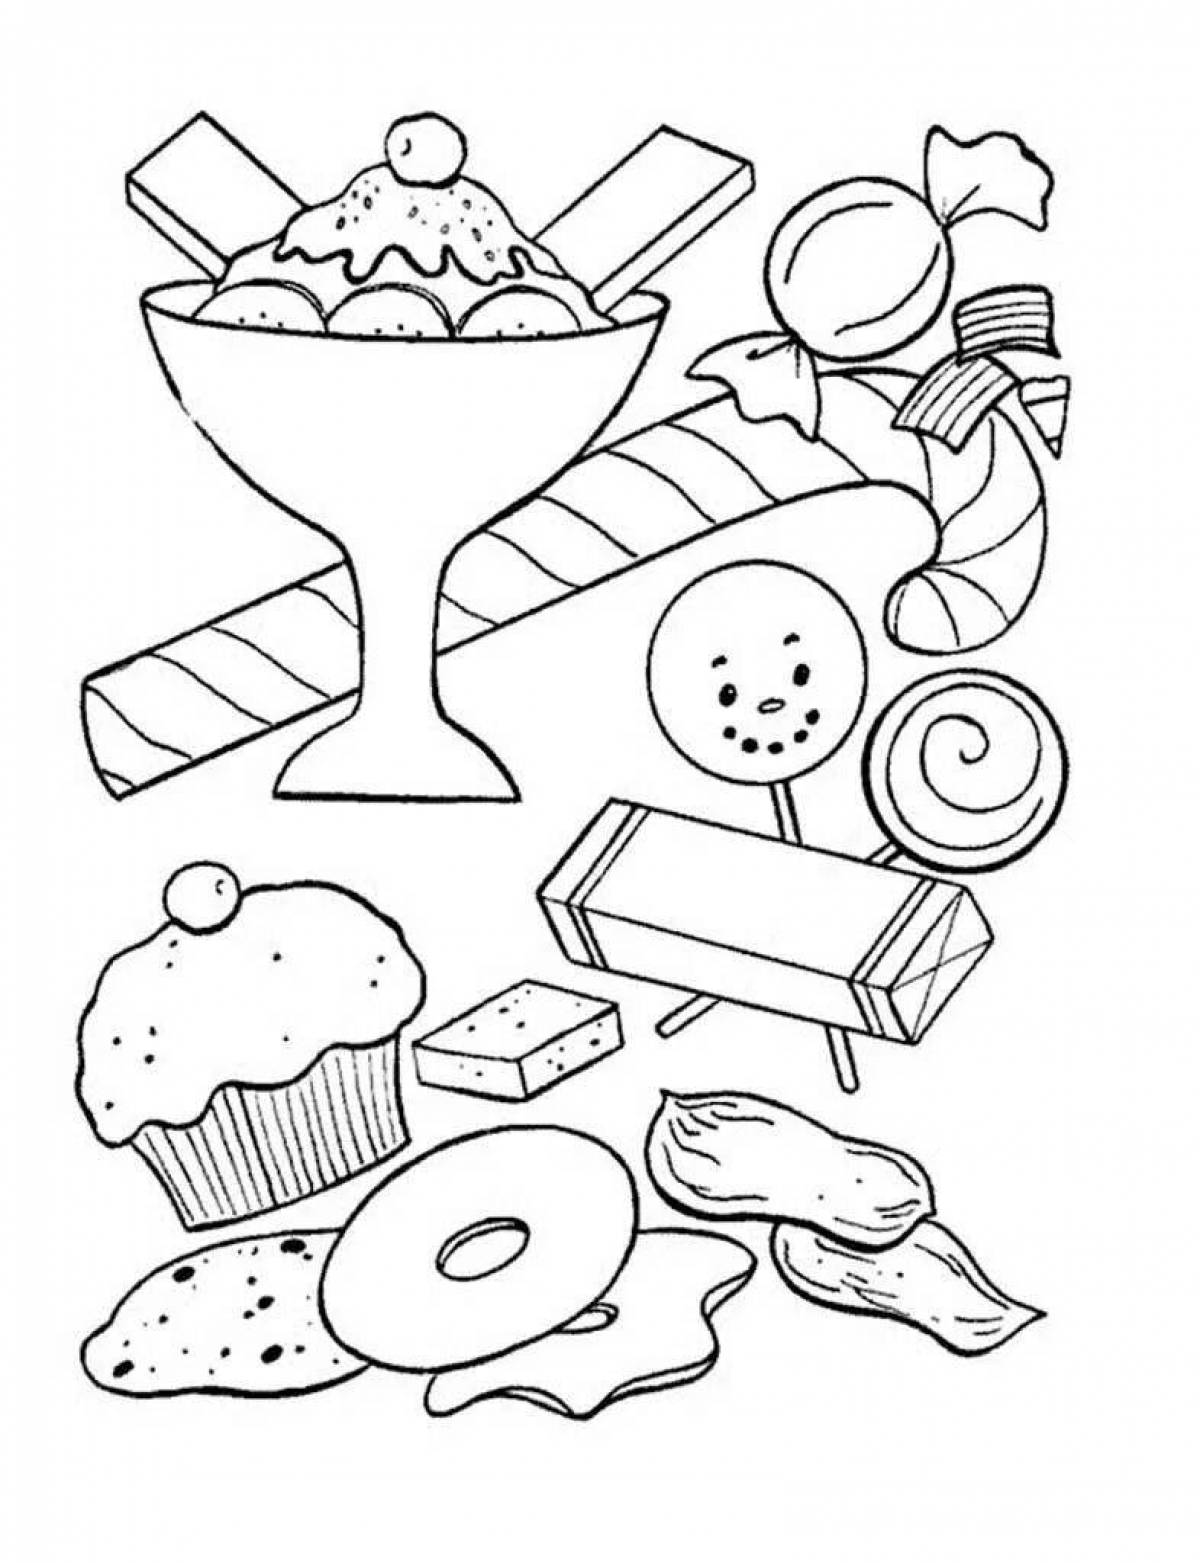 Sky yummy coloring page